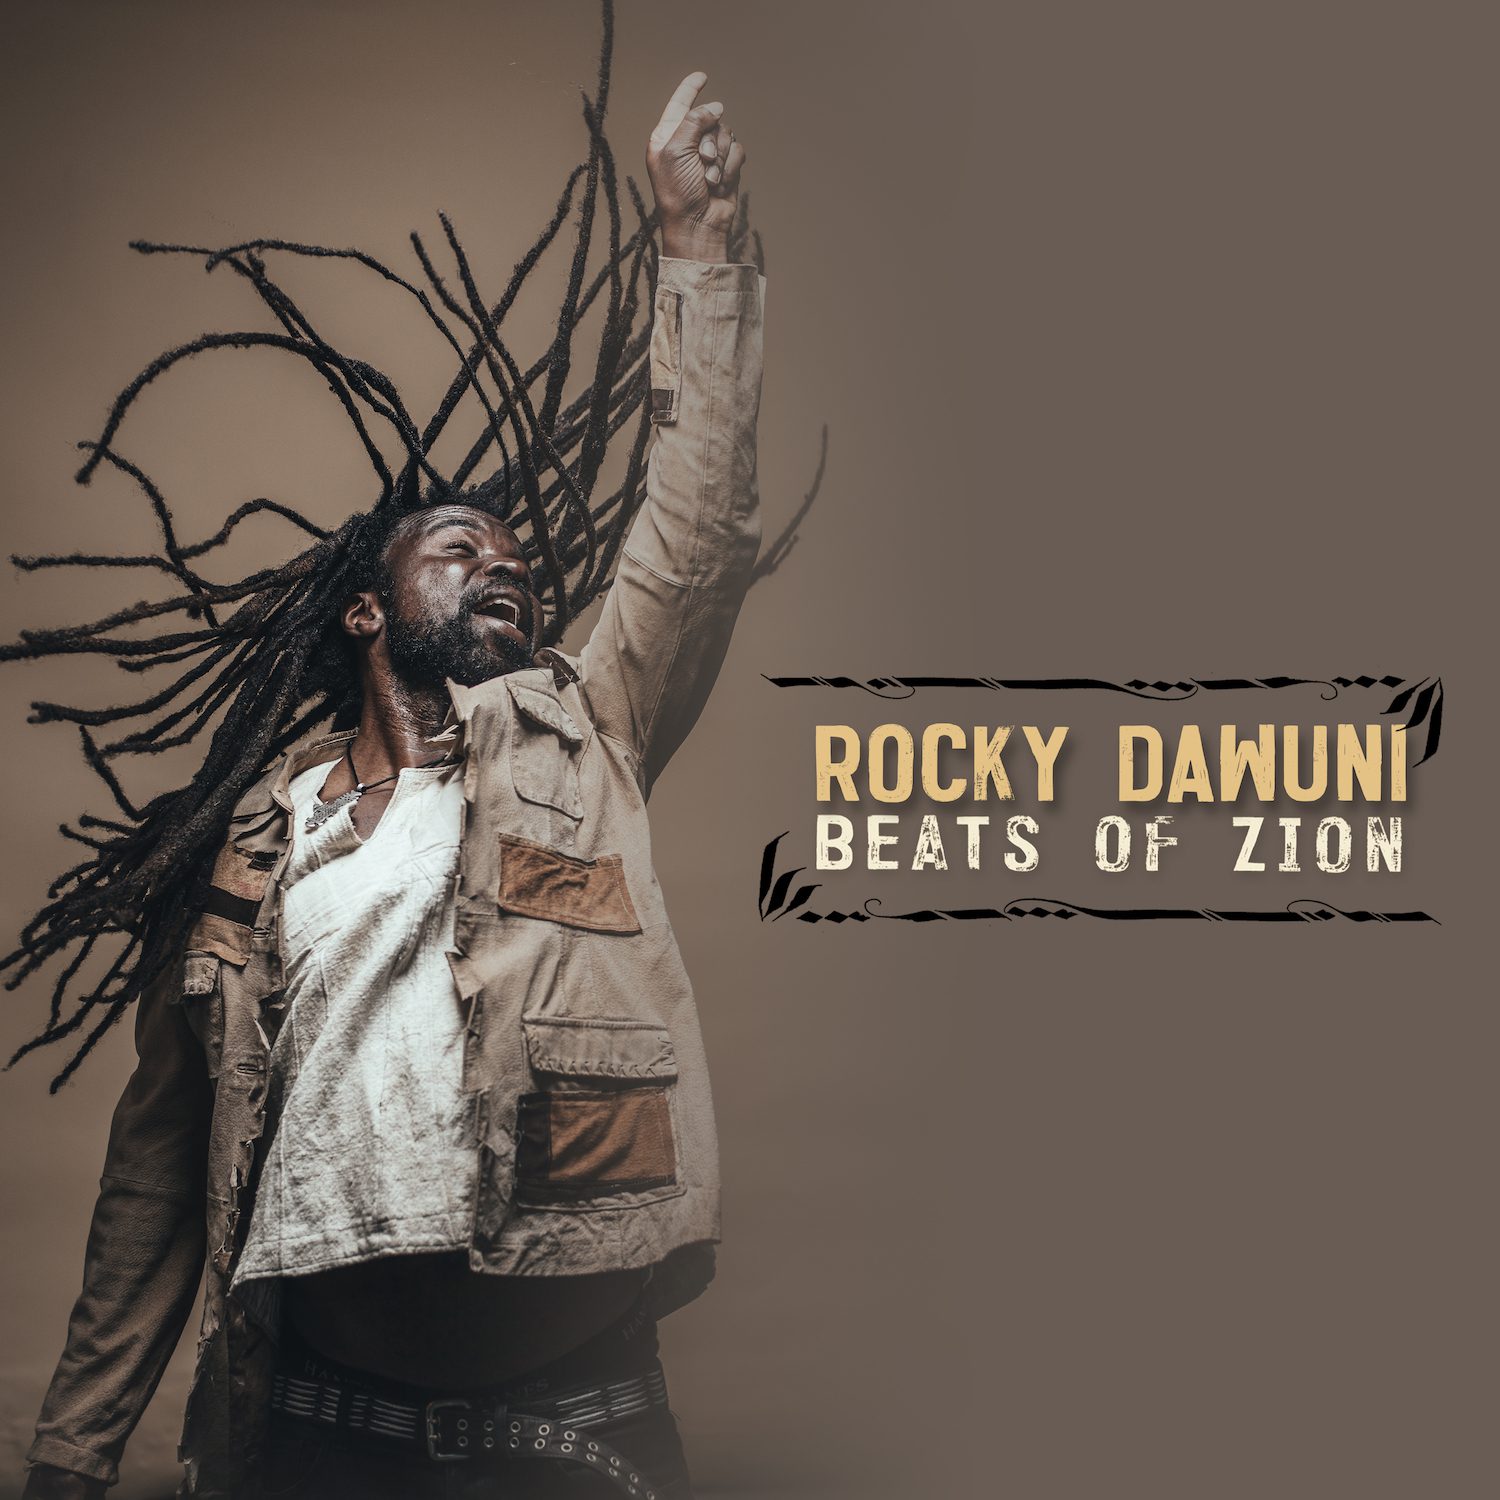 Rocky Dawuni holds “Beats Of Zion” Concert on March 23 at +233 Jazz Bar & Grill